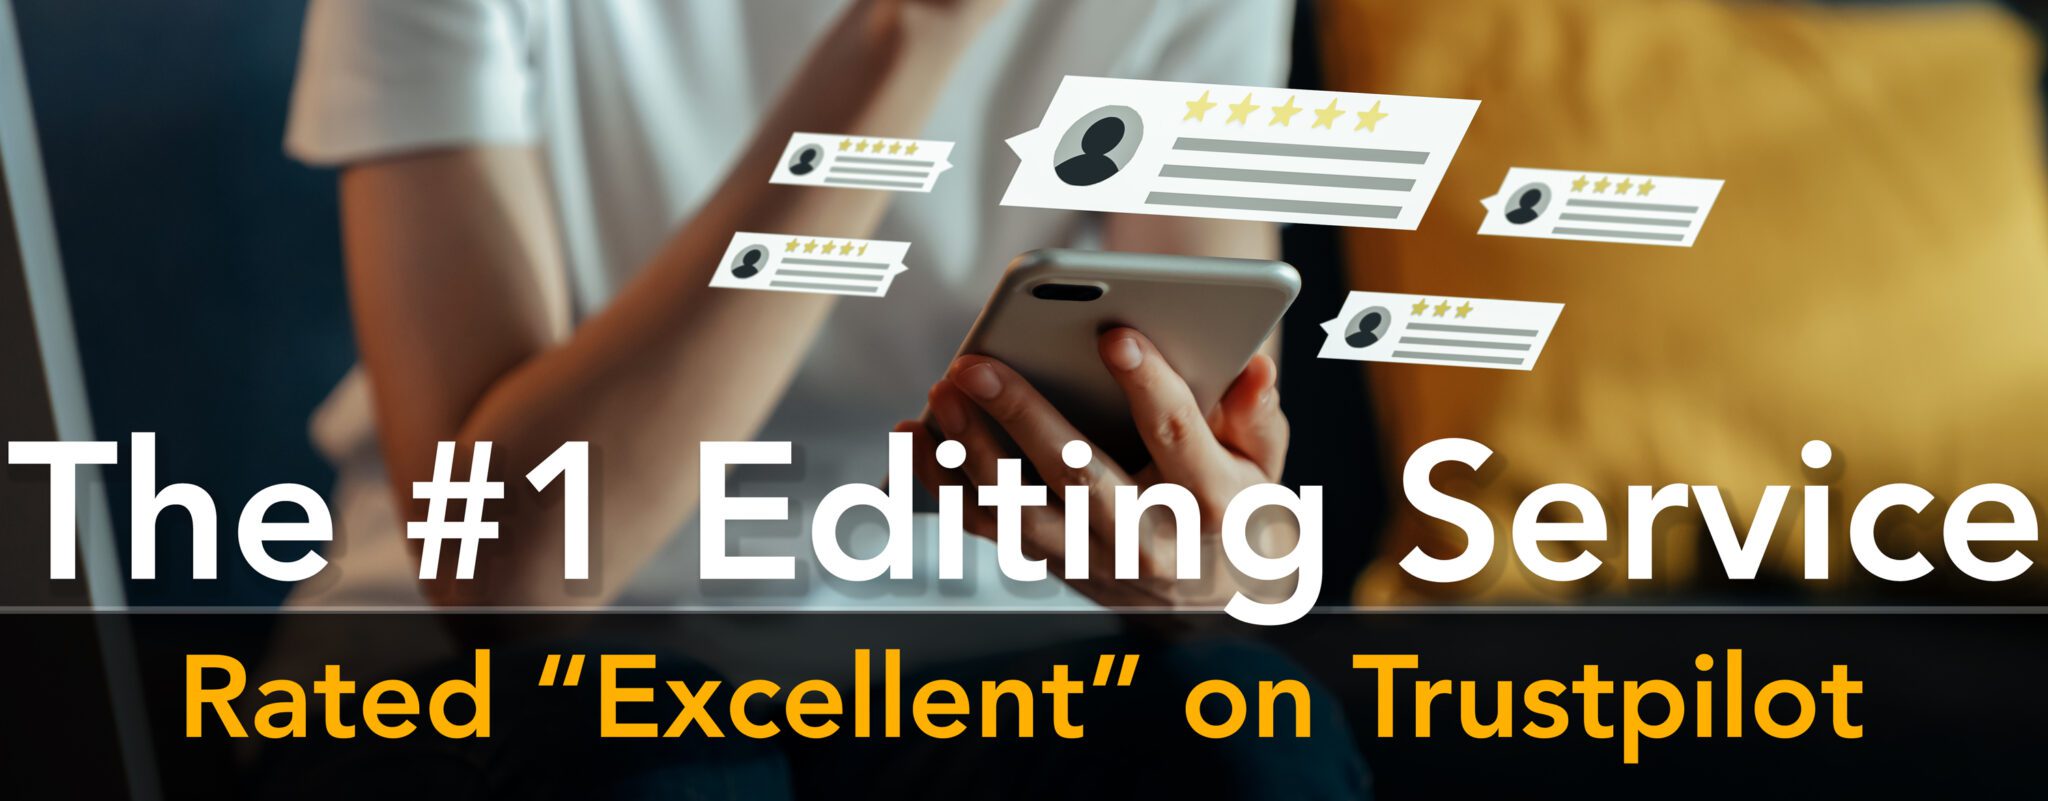 Reviews of the No. 1 Editing Service